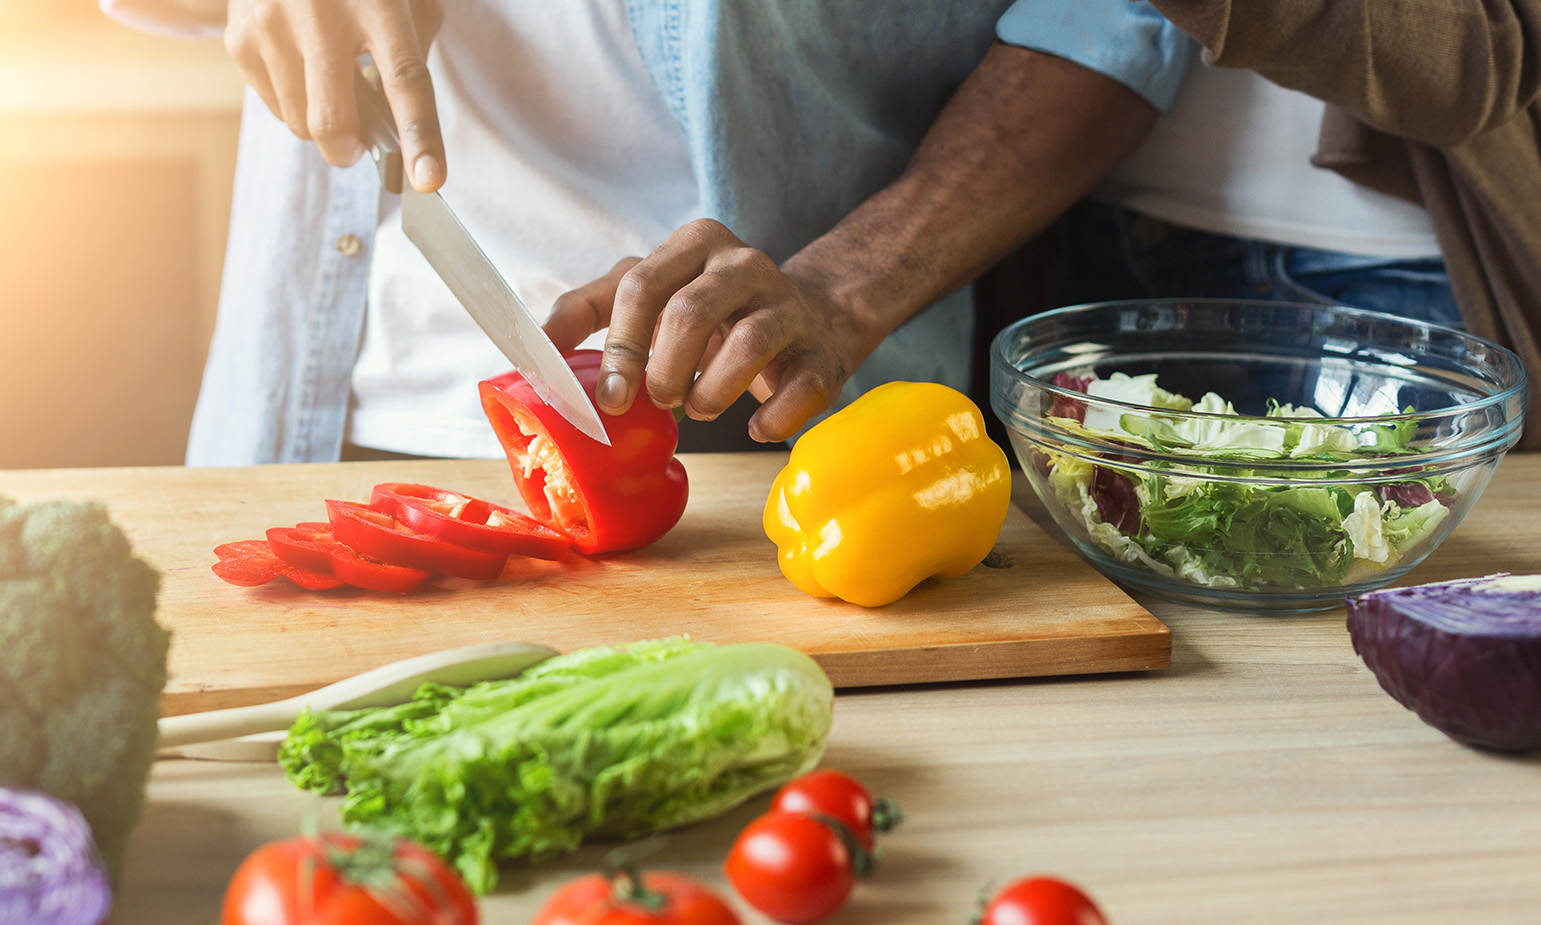 Closeup of bell peppers on cutting board being sliced by man's hands, woman close behind him, other vegetables arrayed on table